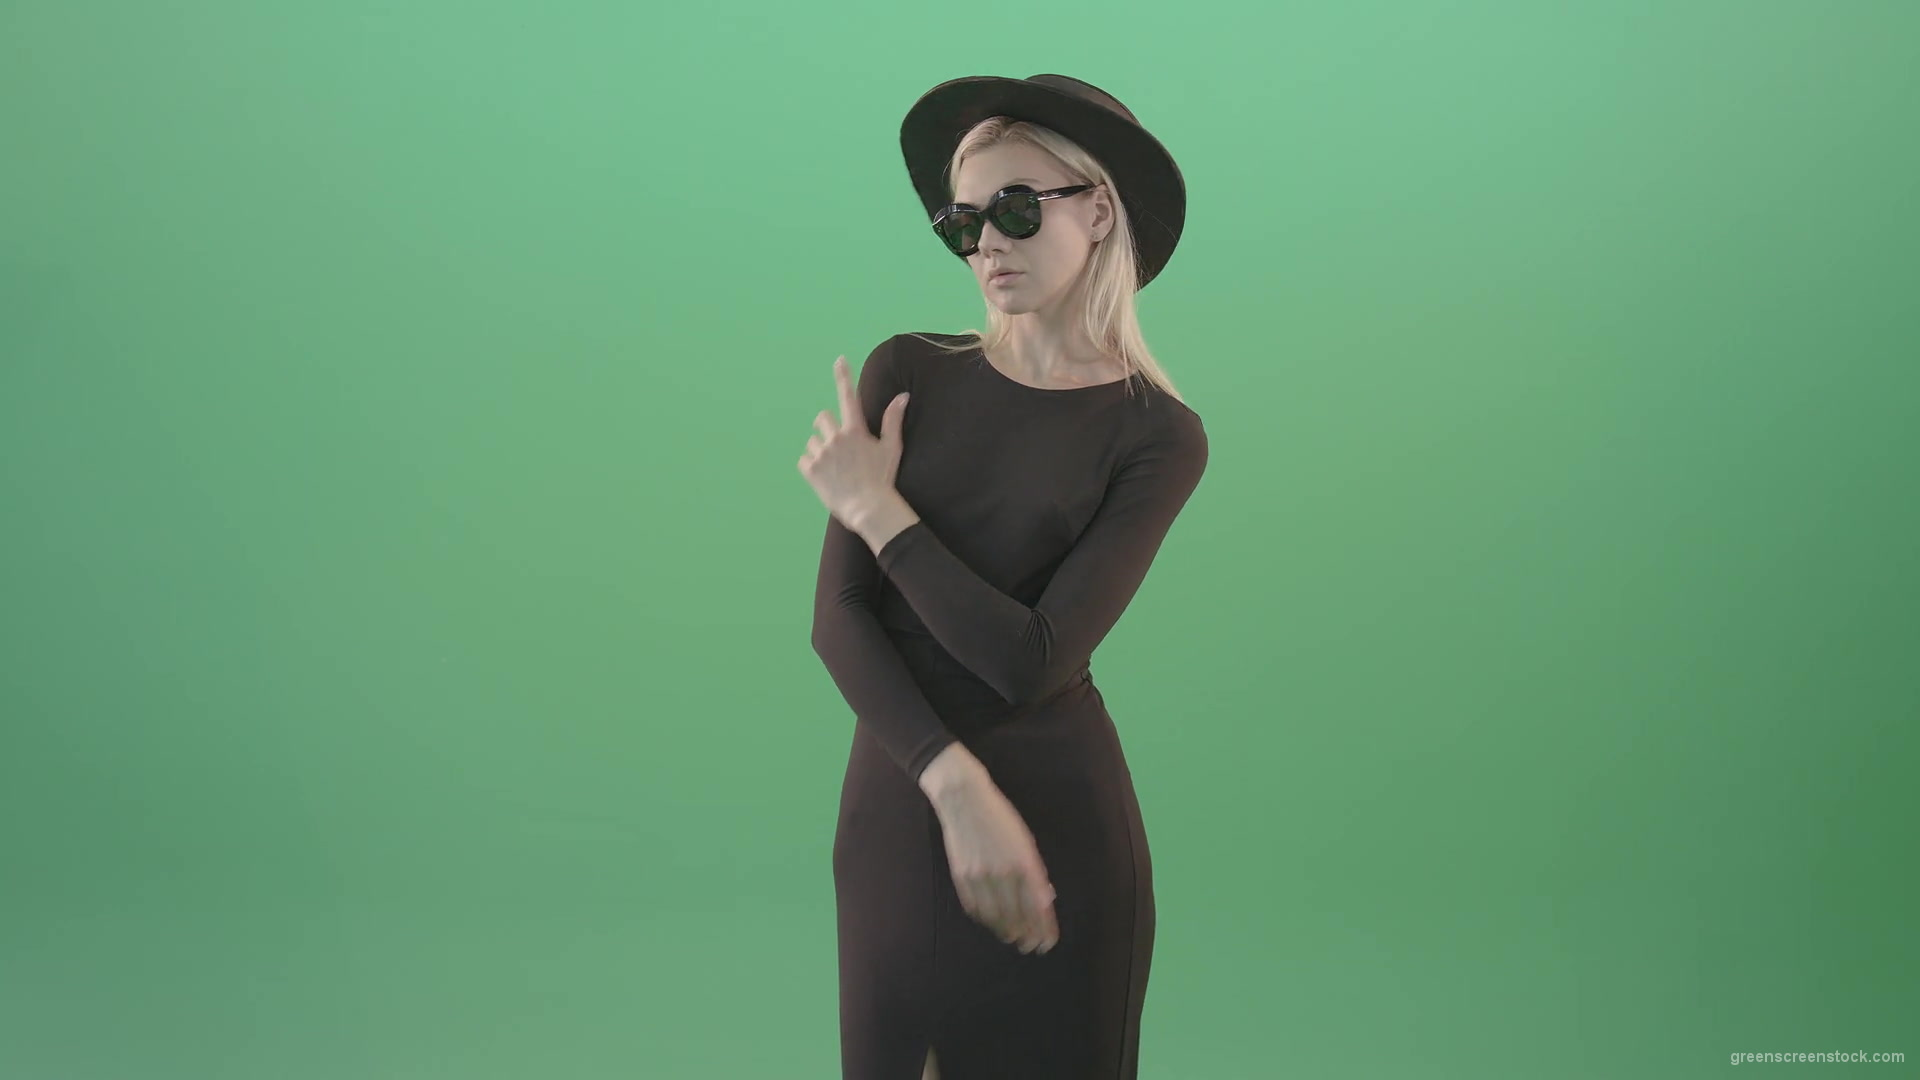 Luxury-elegant-girl-showing-photo-model-posing-gestures-isolated-on-Green-Screen-4K-Video-Footage-1-1920_004 Green Screen Stock